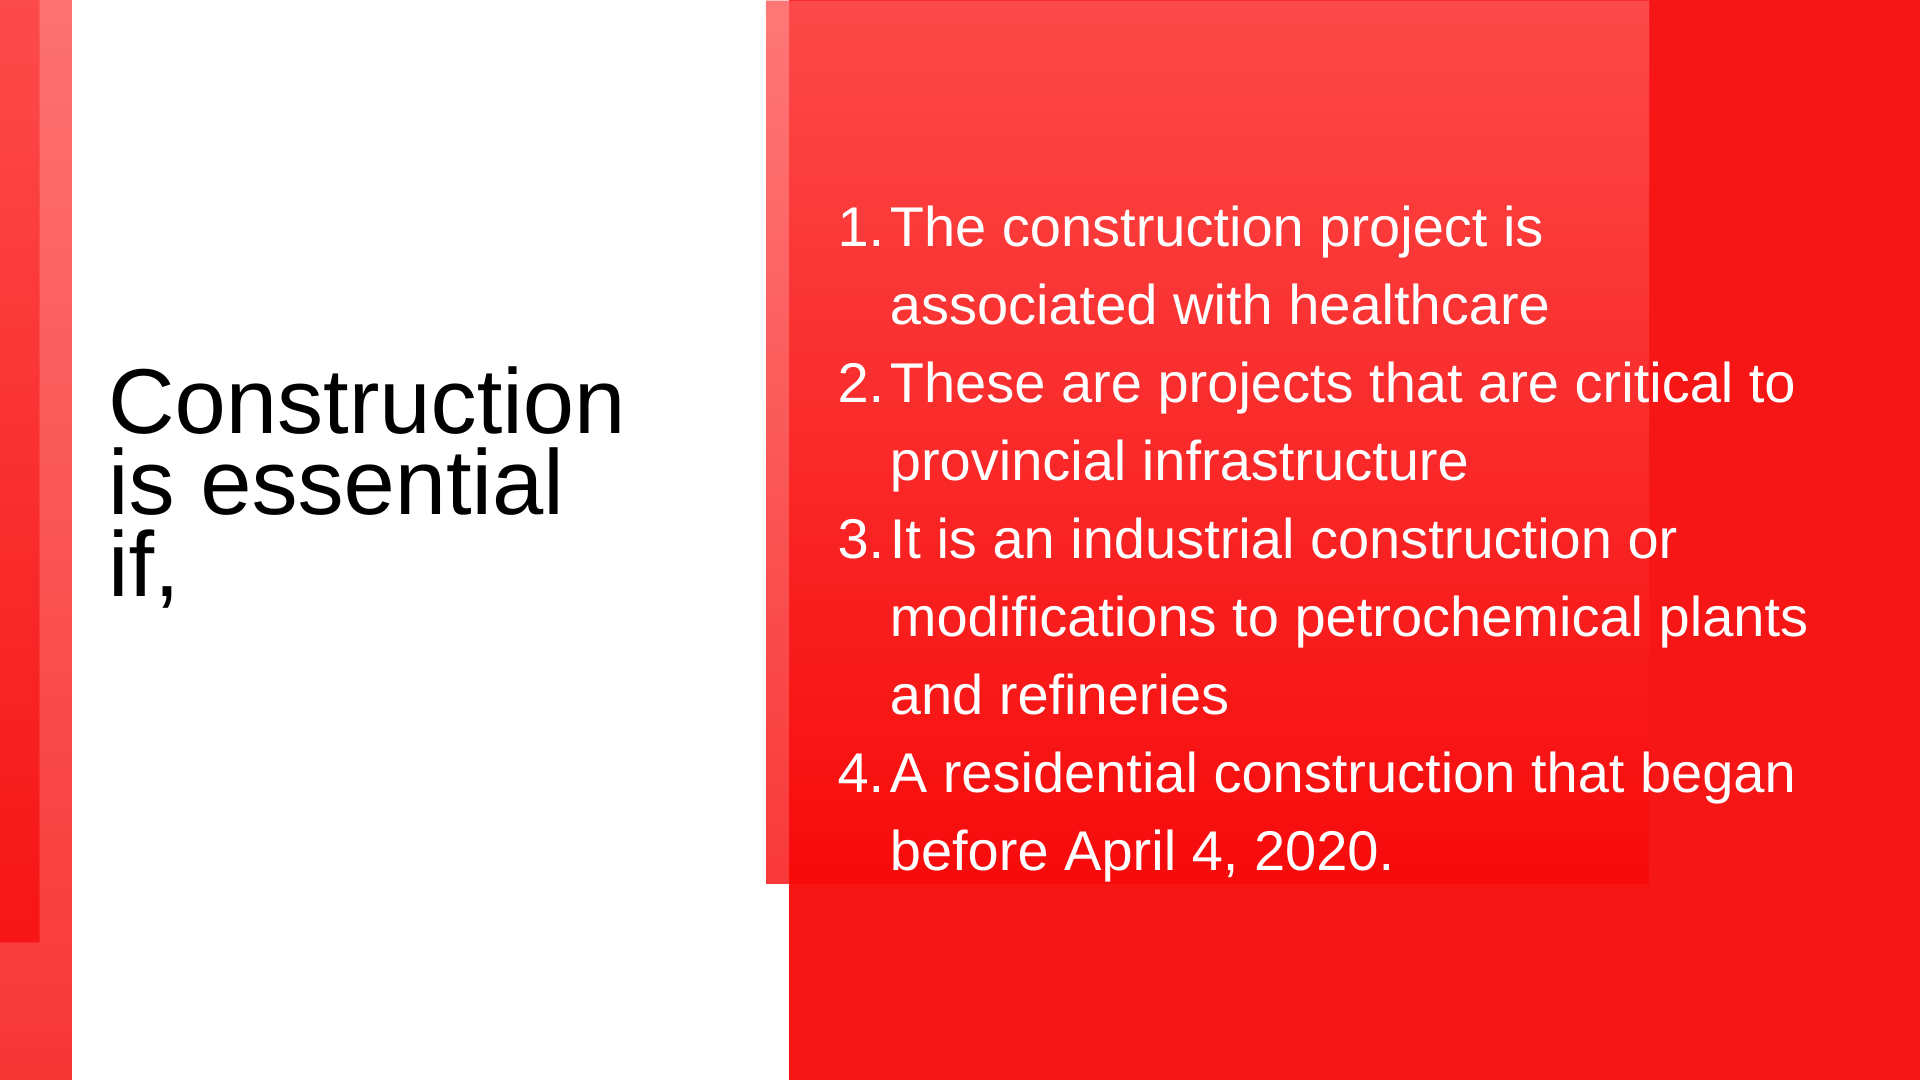 How is construction essential in COVID-19?